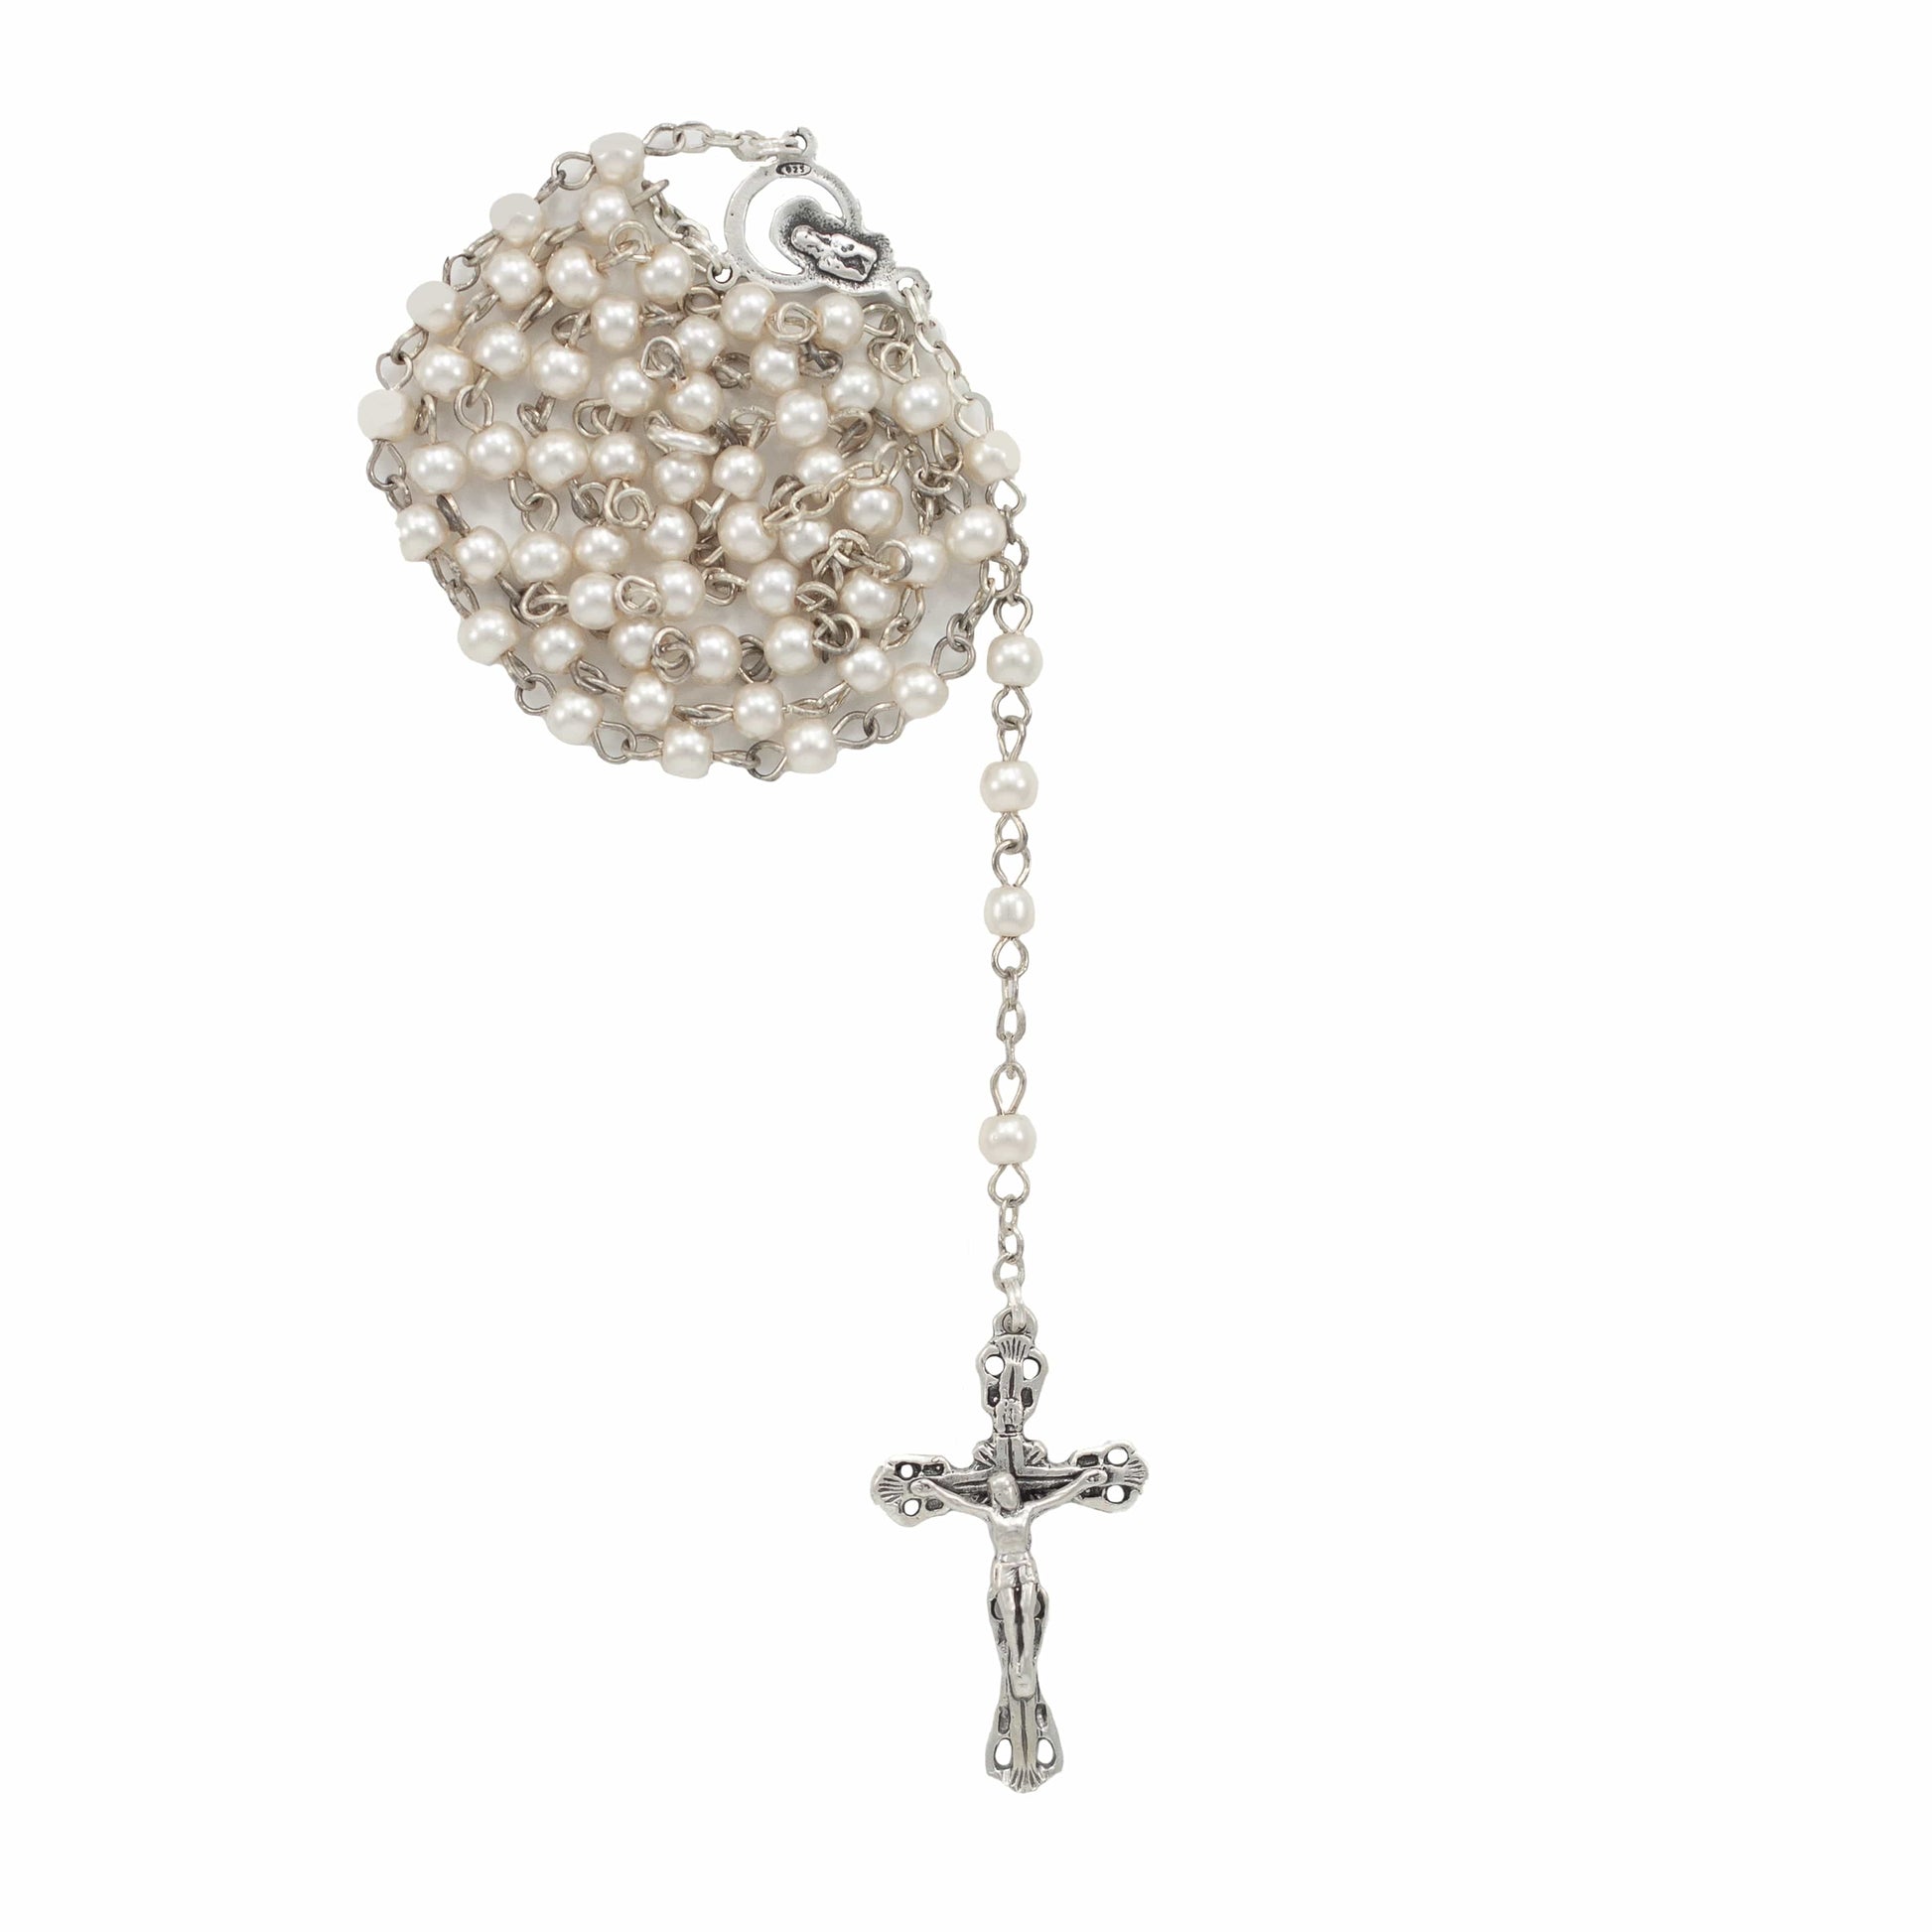 MONDO CATTOLICO Prayer Beads Sterling Silver Pearl Rosary Beads